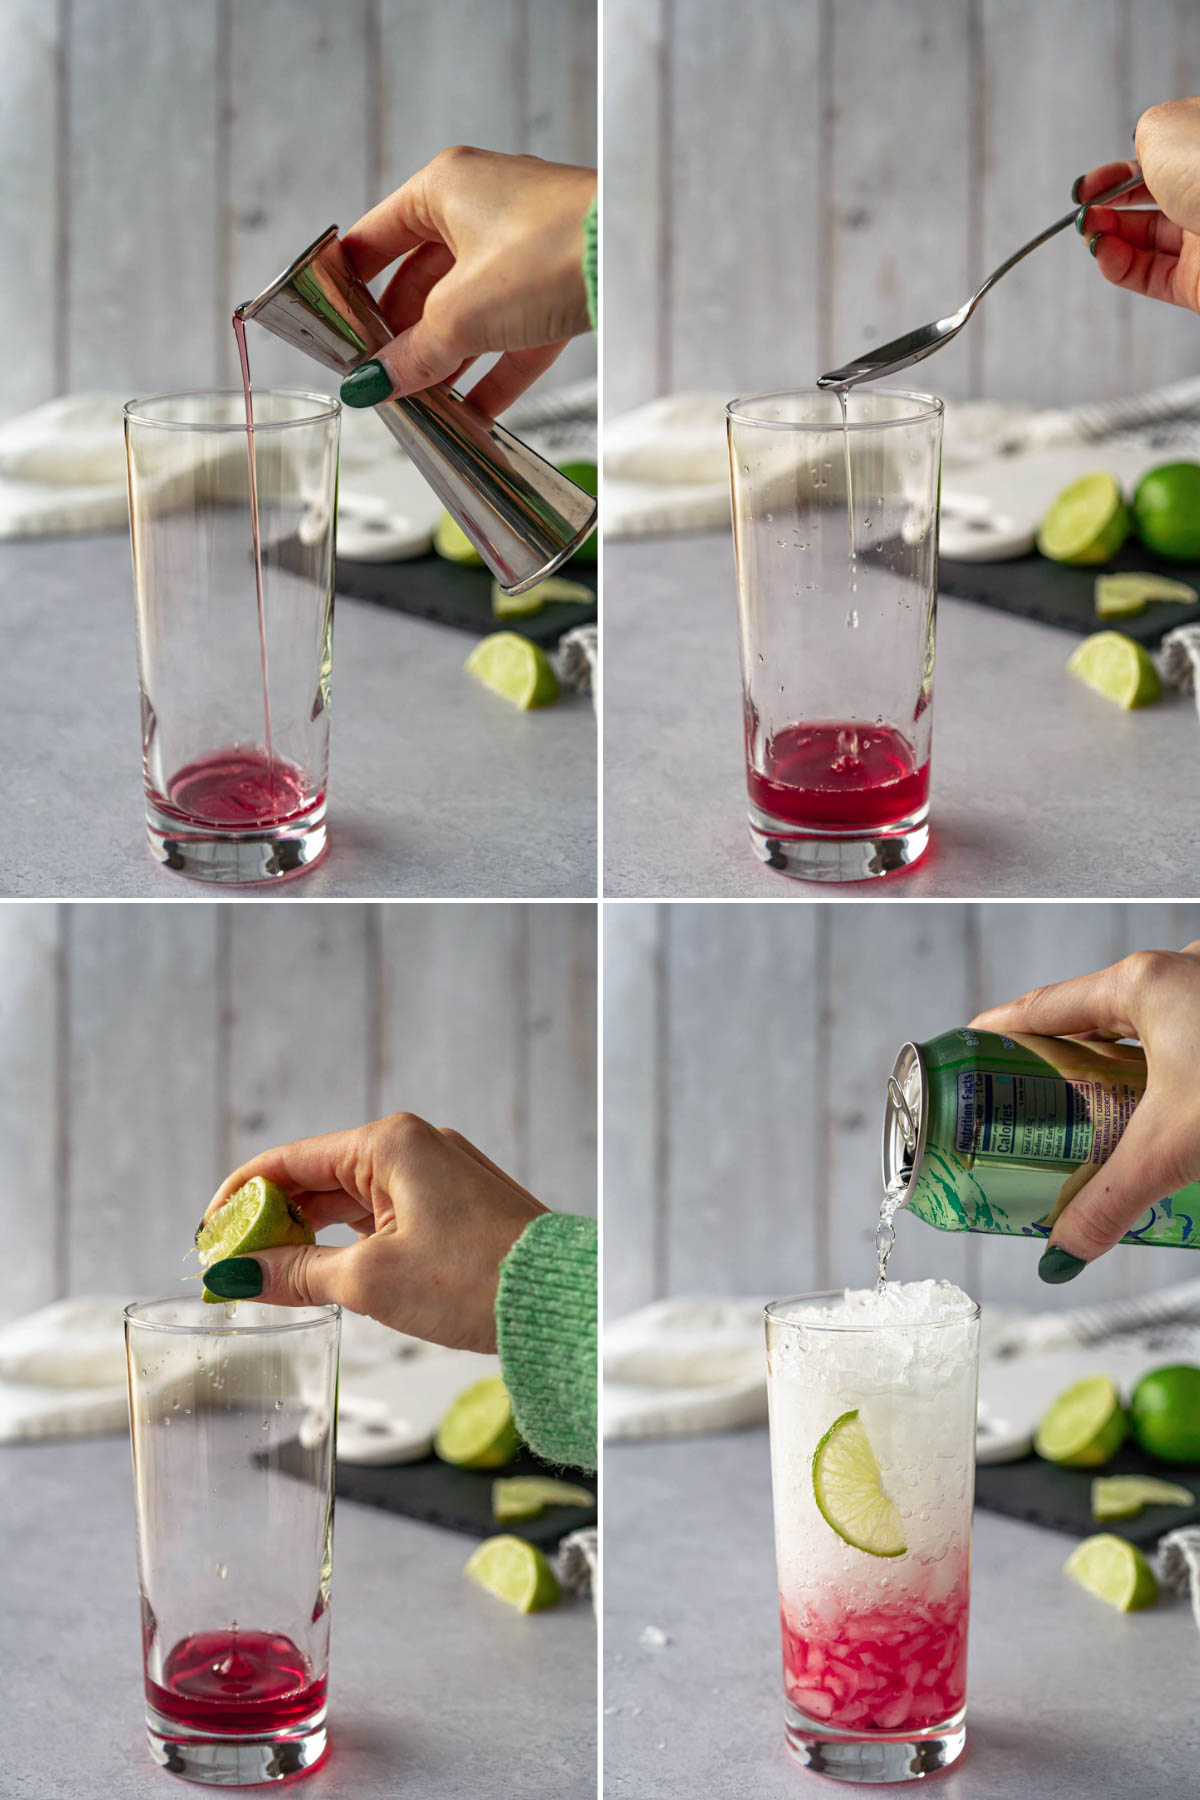 collage with four images showing process of building a mocktail; image 1 - hand holding a metal cocktail jigger and pouring cranberry juice into a glass; image 2 - spoon drizzling simple syrup into a glass; image 3 - squeezing lime into a glass; image 4 - hand holding a green can of sparkling water and pouring it into a glass filled with crushed ice and magenta-colored juice